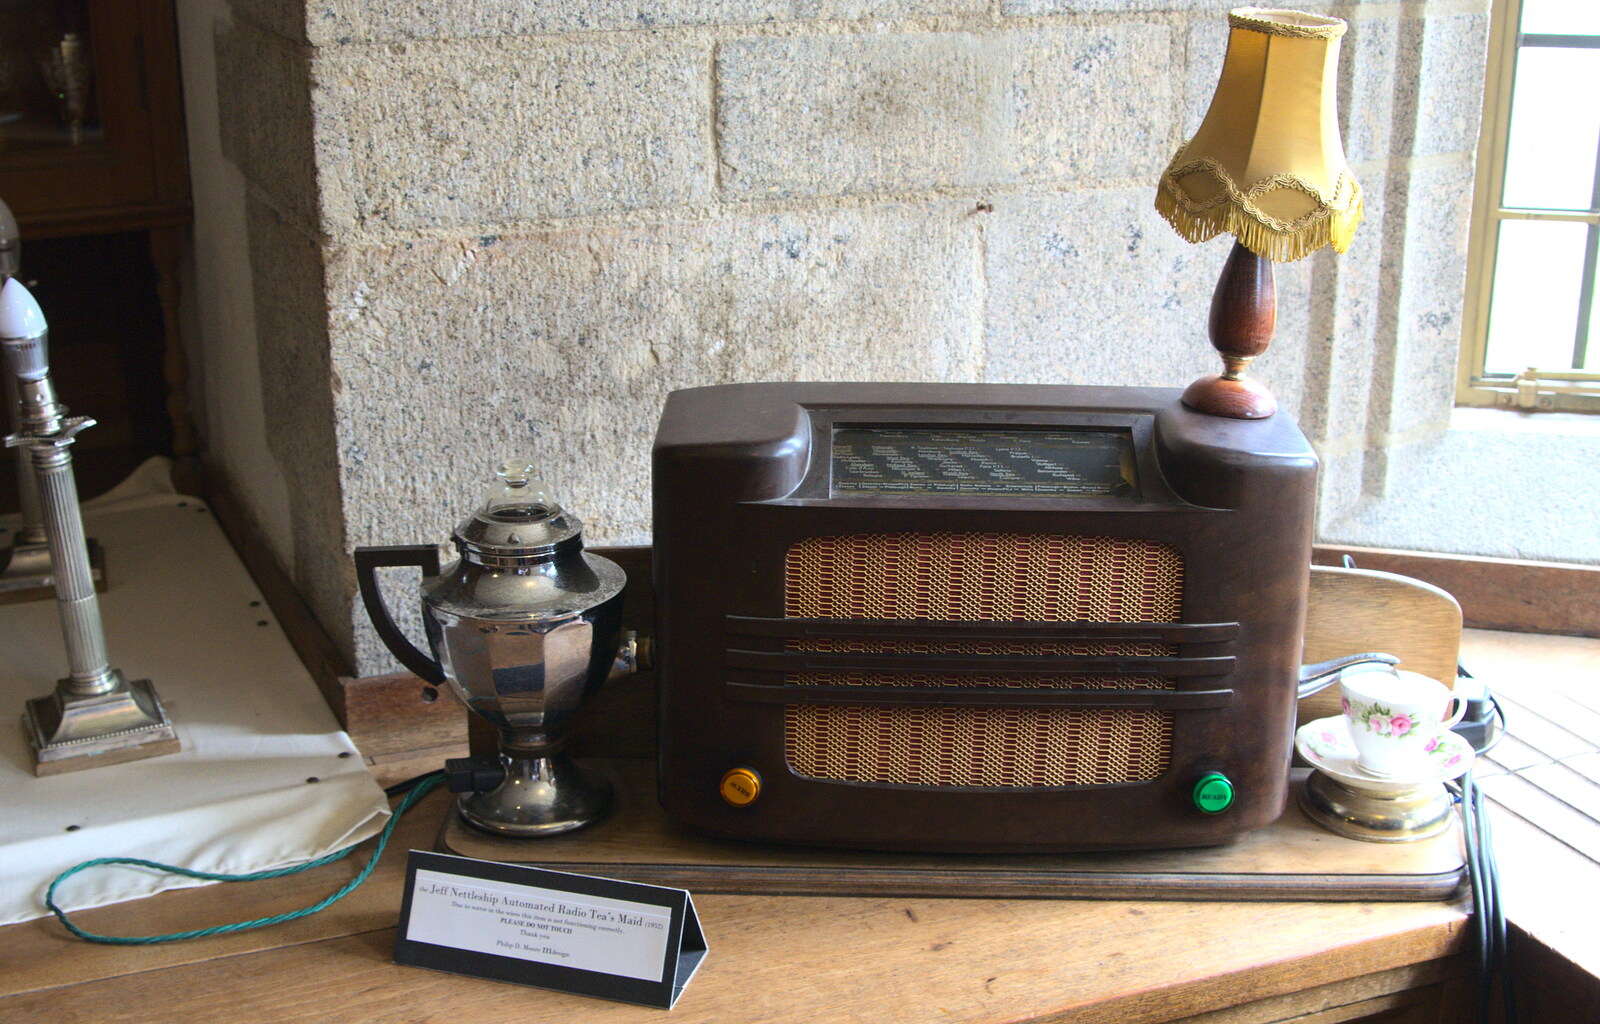 The Jeff Nettleship Automated Teas Maid from 1952 from The Tom Cobley and Castle Drogo, Spreyton and Drewsteignton, Devon - 11th August 2016